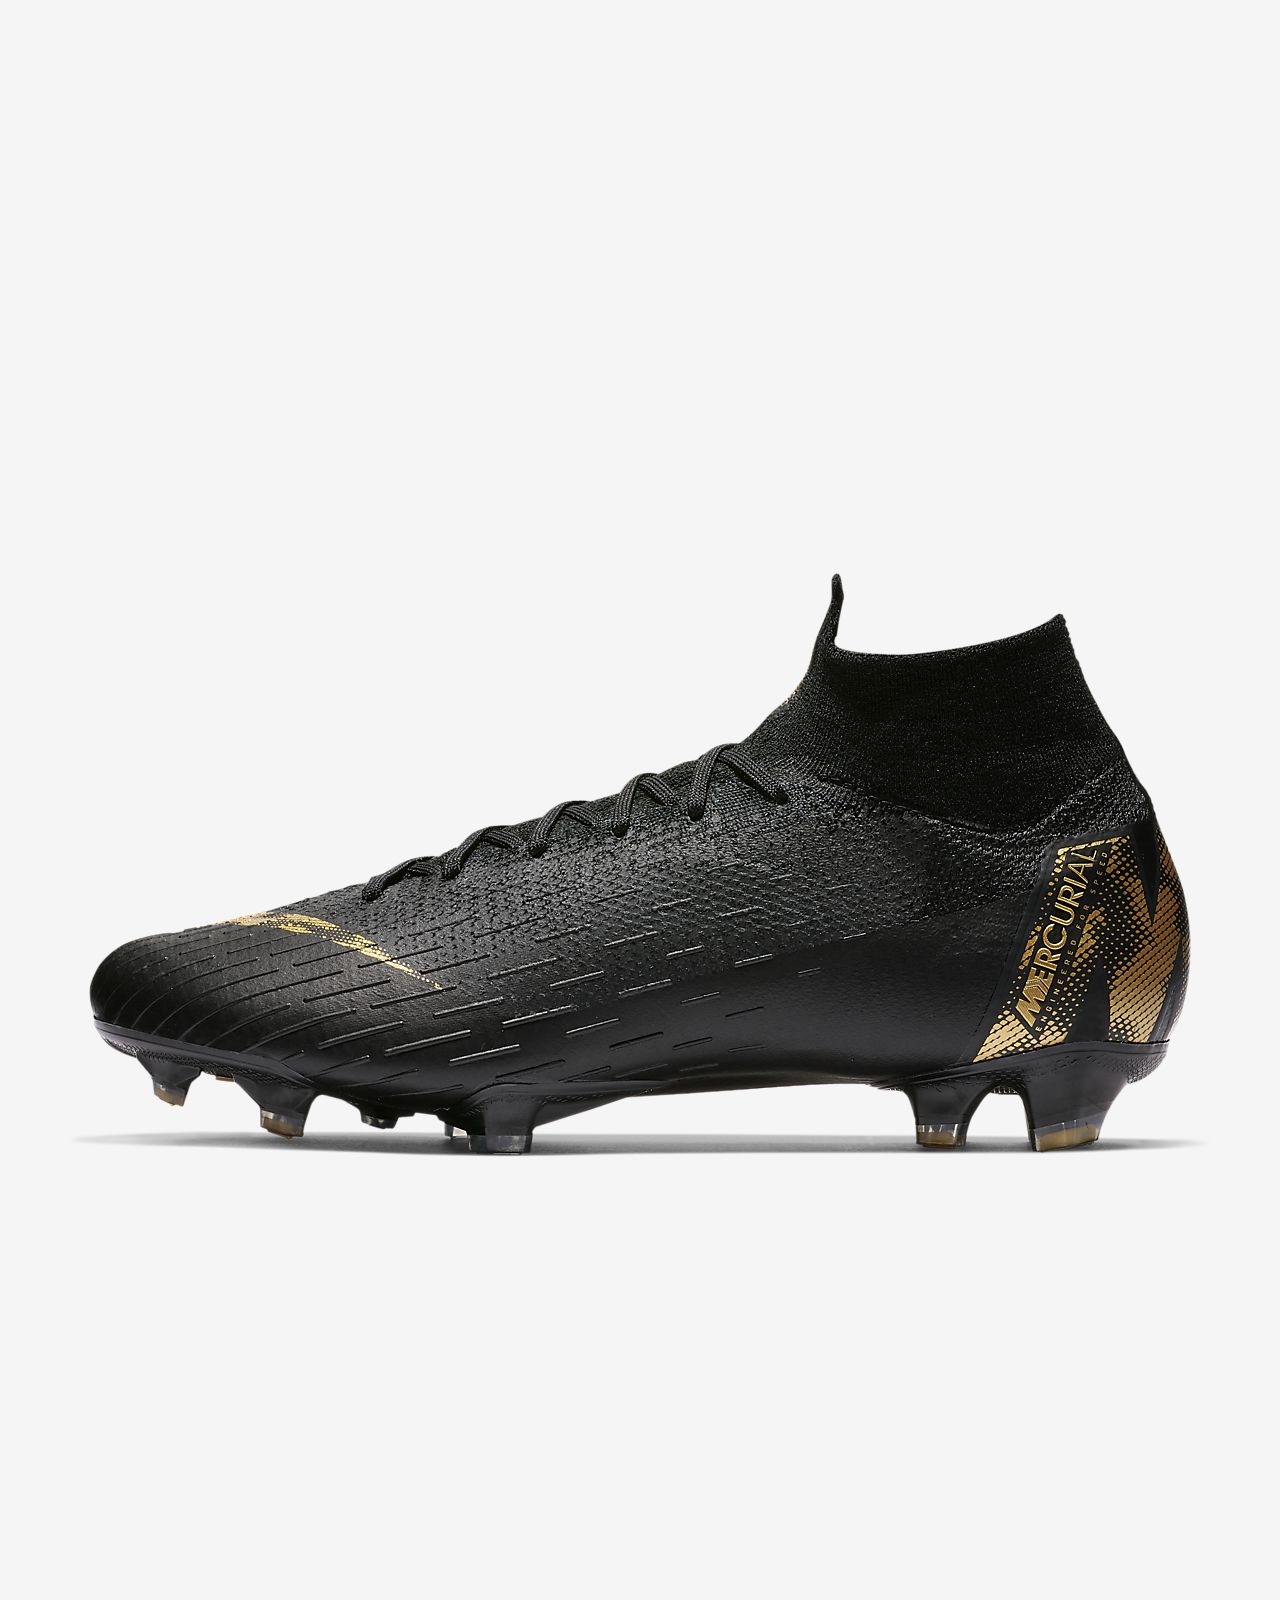 Nike Superfly 6 Elite Fg Firm Ground Football Boot